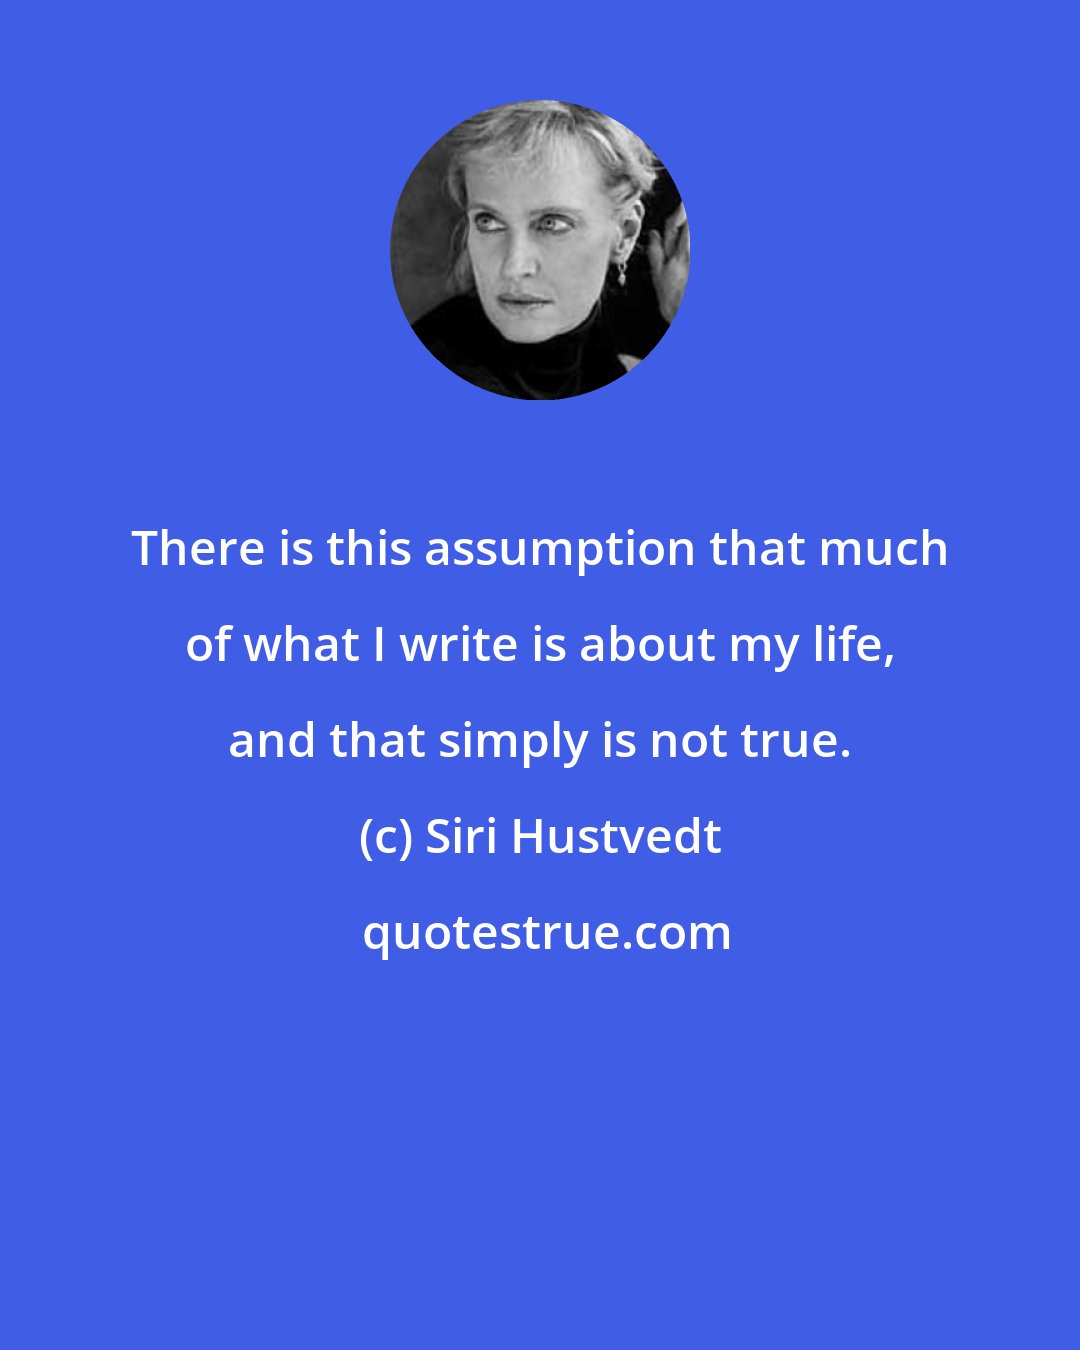 Siri Hustvedt: There is this assumption that much of what I write is about my life, and that simply is not true.